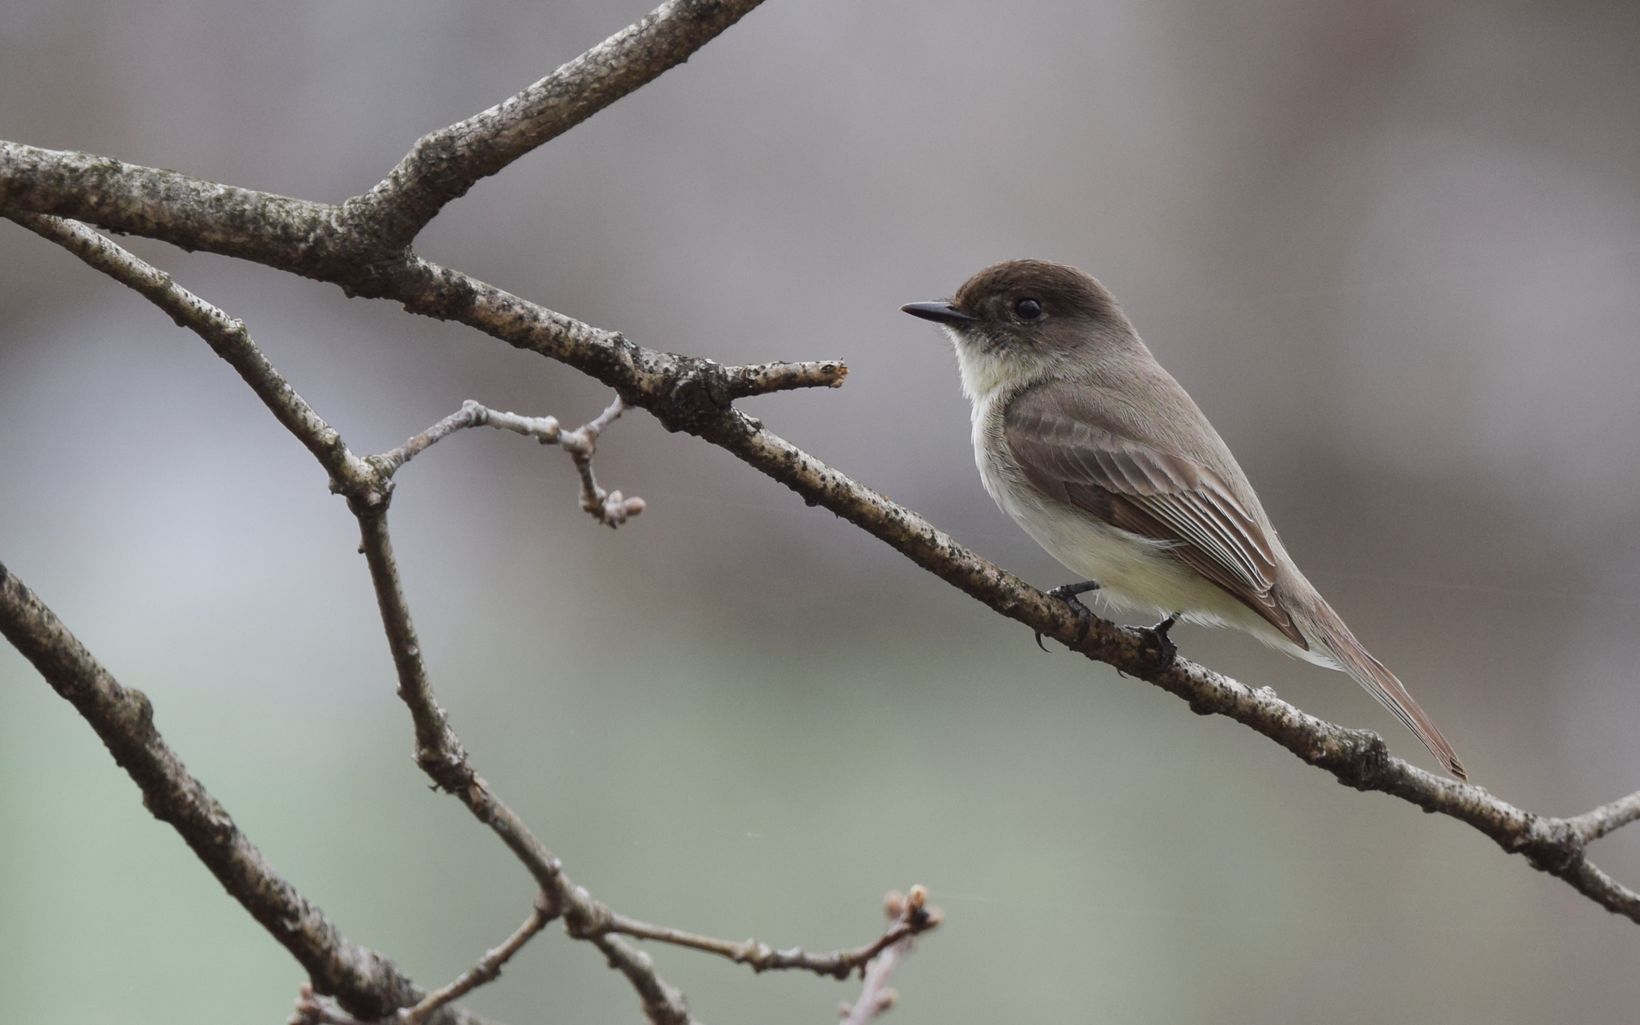 A gray bird rests on a thin brown branch.